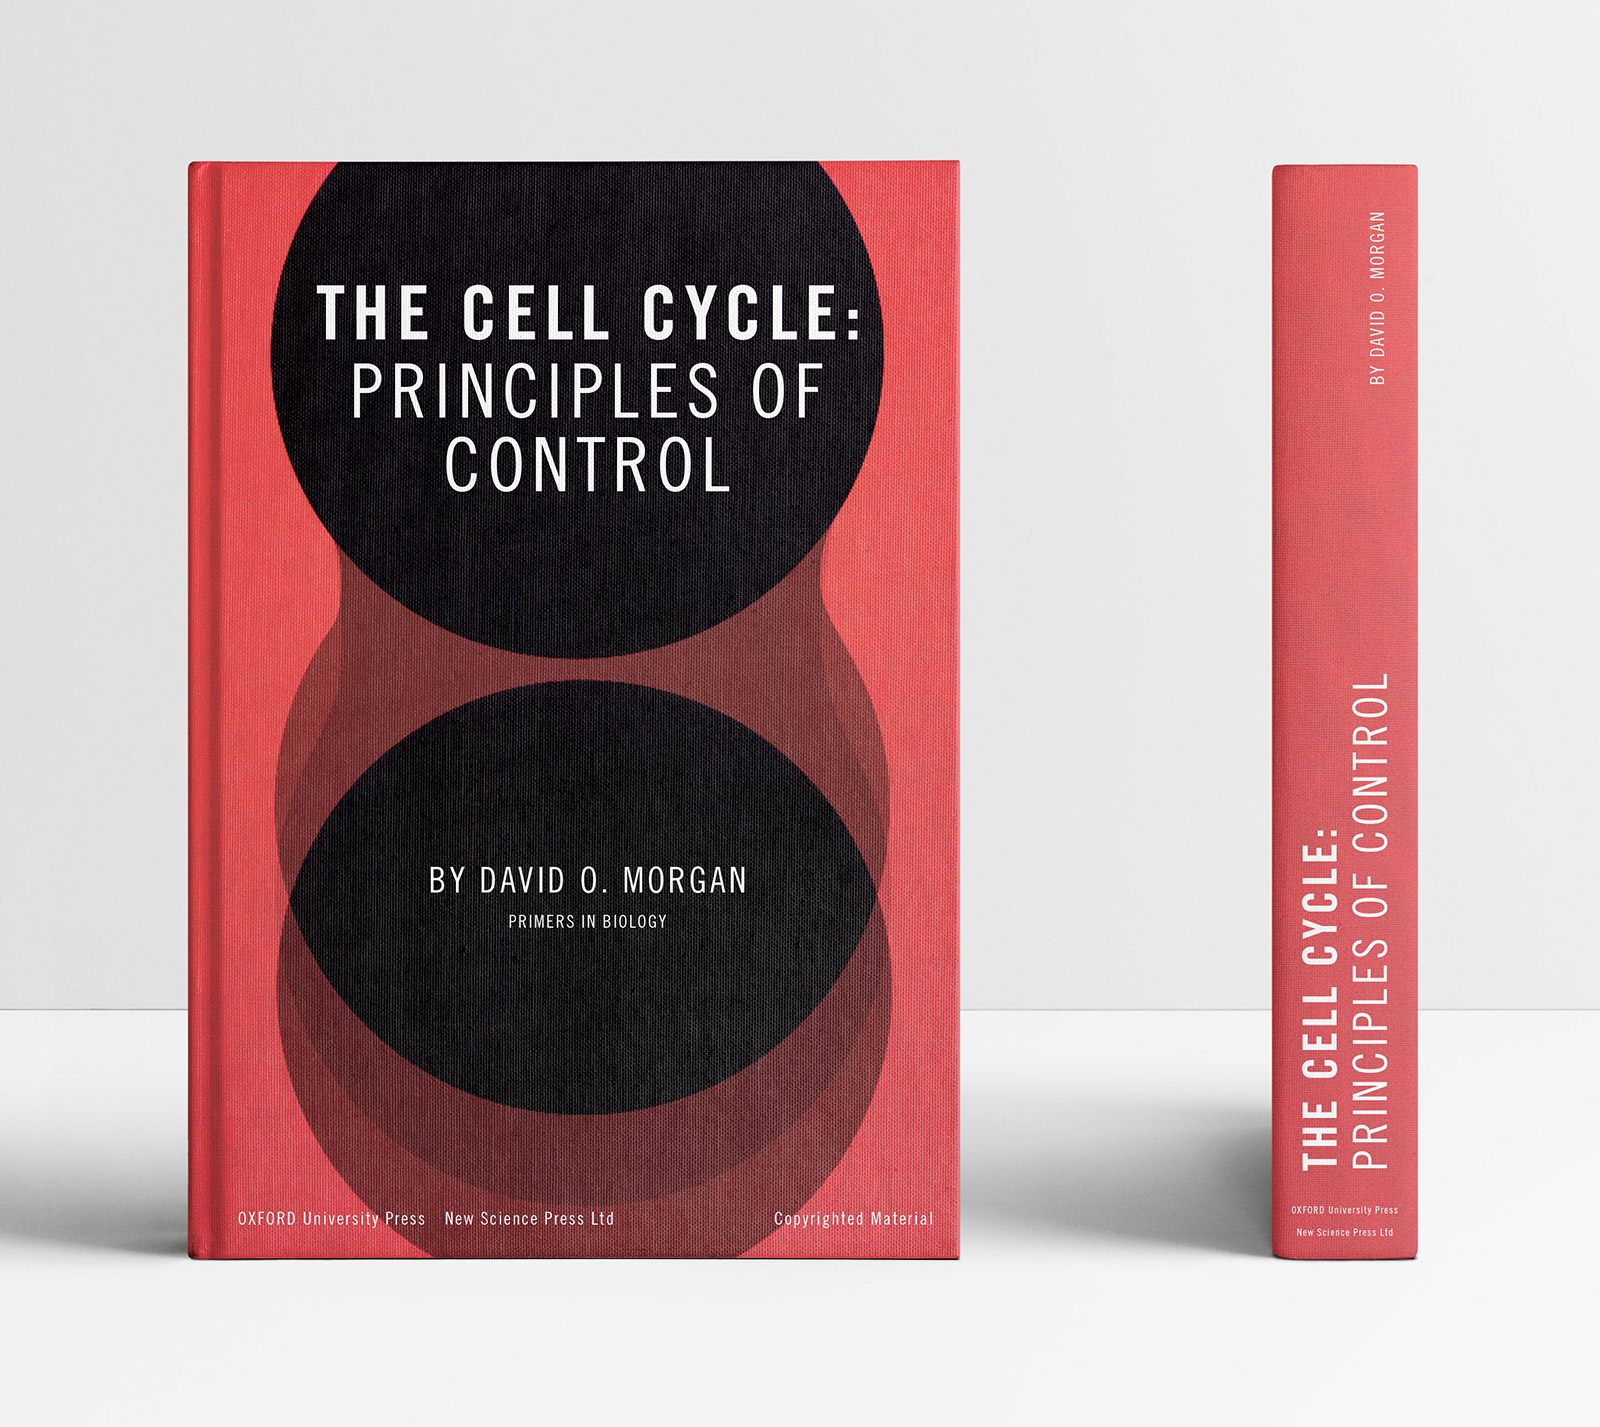 The Cell Cycle A visual experiment